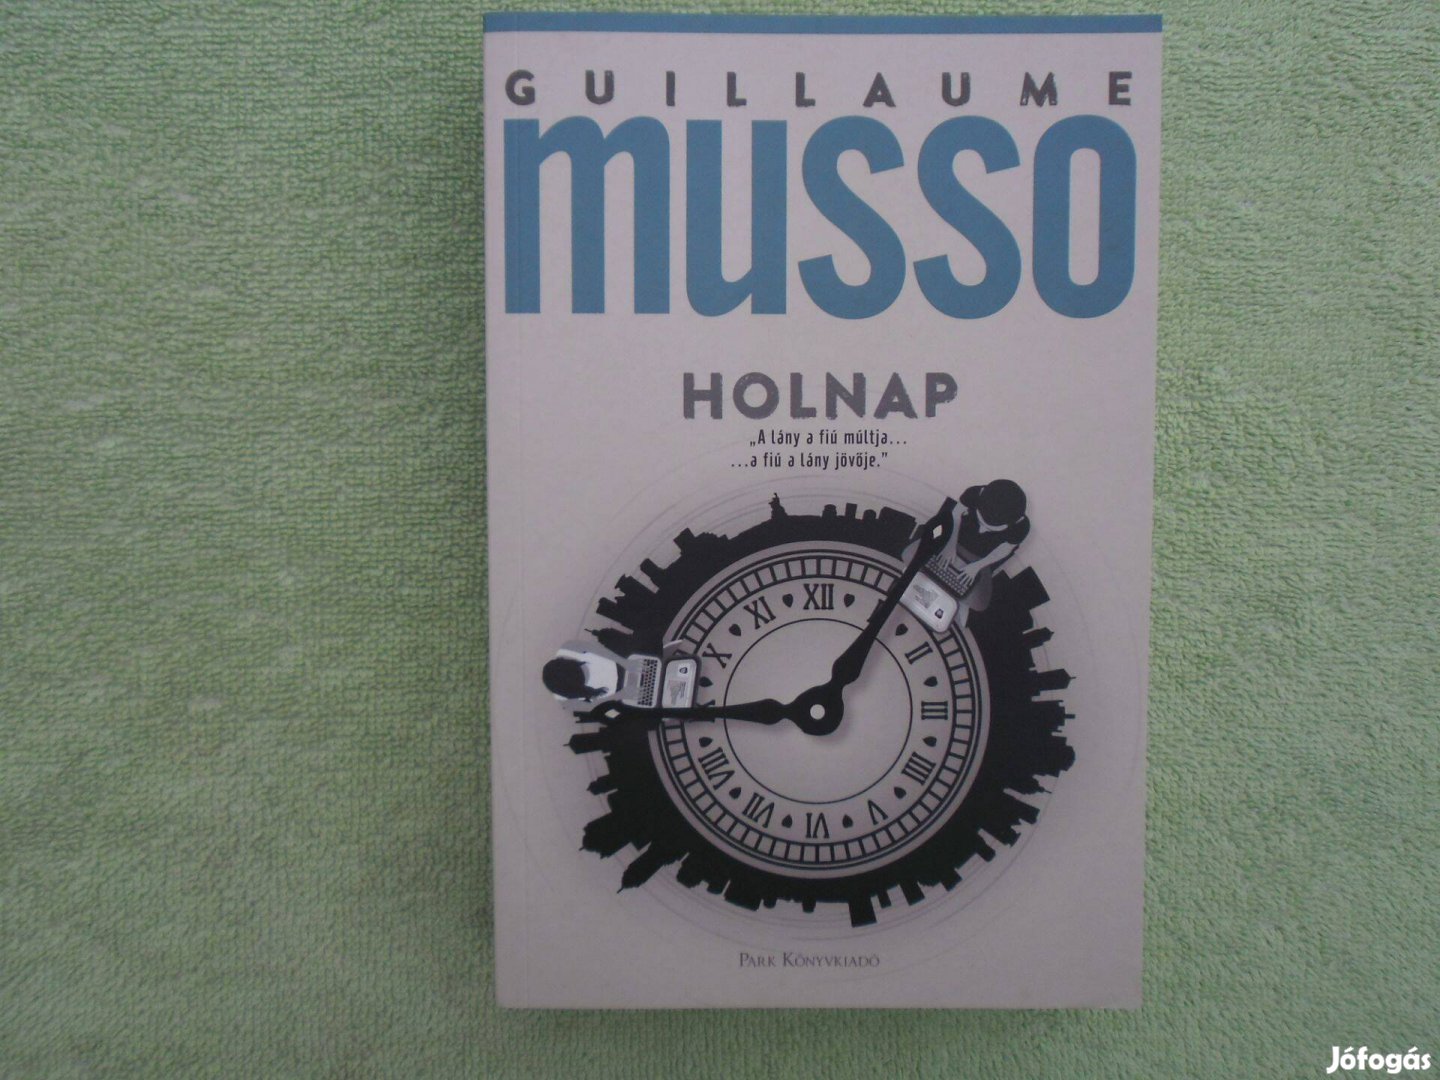 Guillaume Musso: Holnap